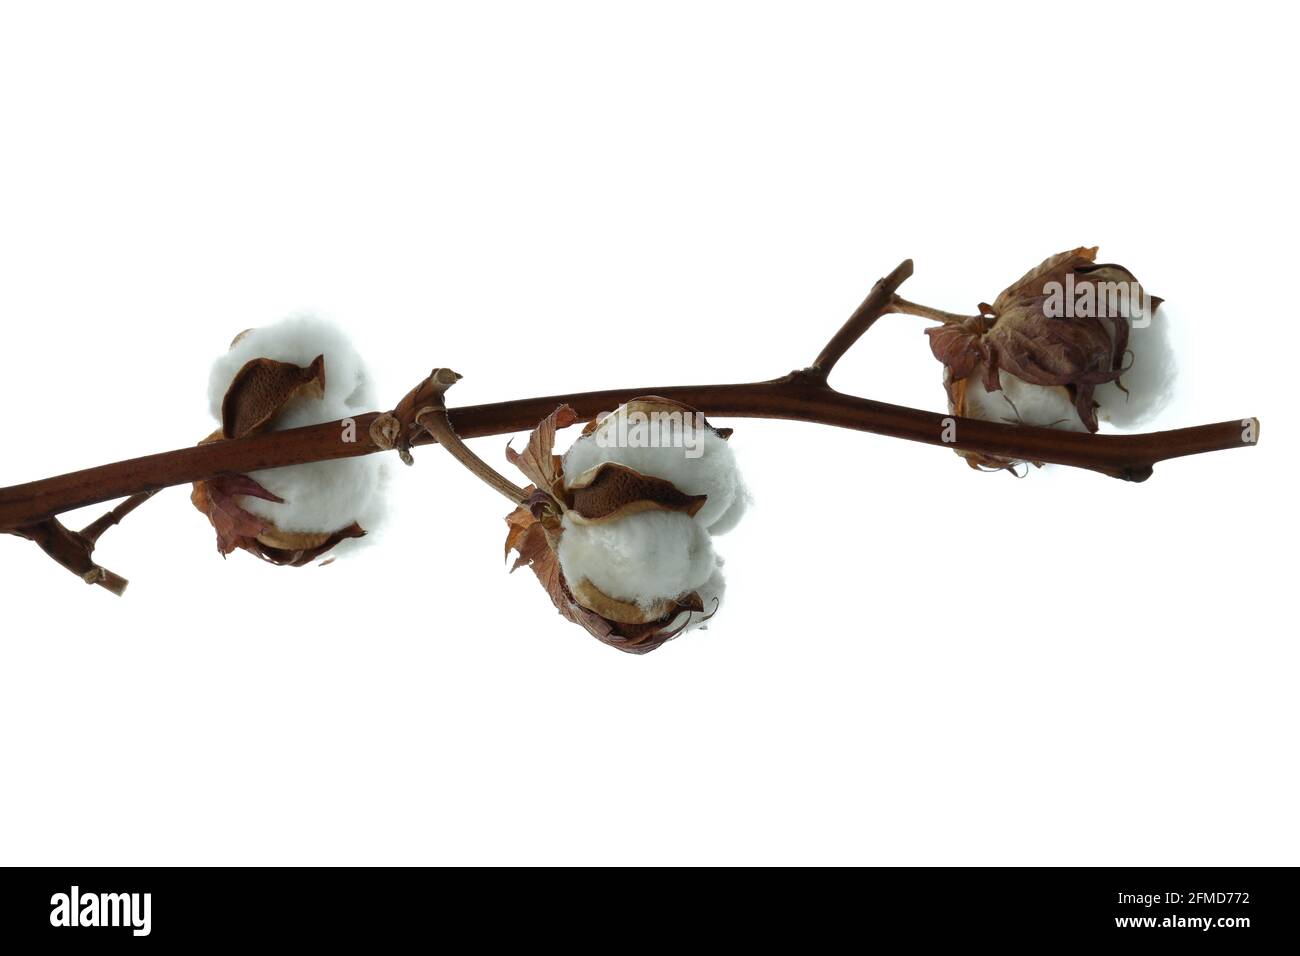 Cotton plant branch isolated on white background Stock Photo